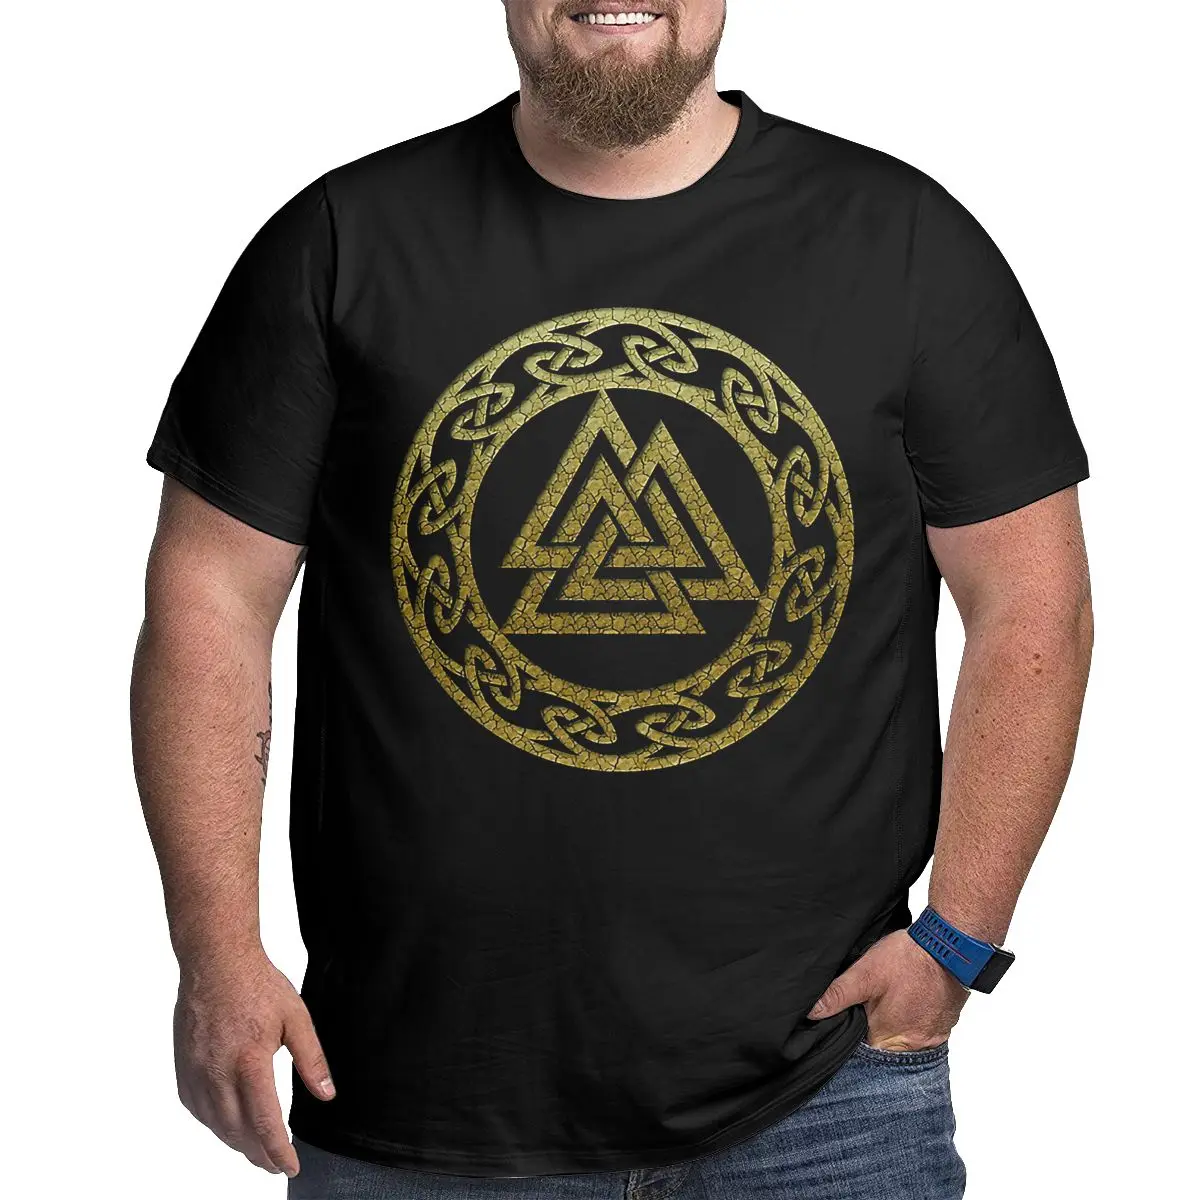 

Valknut Odin Symbol Norse Vikings Zipper Pouch Big Size Funny Loose Large T-shirt Humor Graphic Big Tall Man Oversized Tops Tees